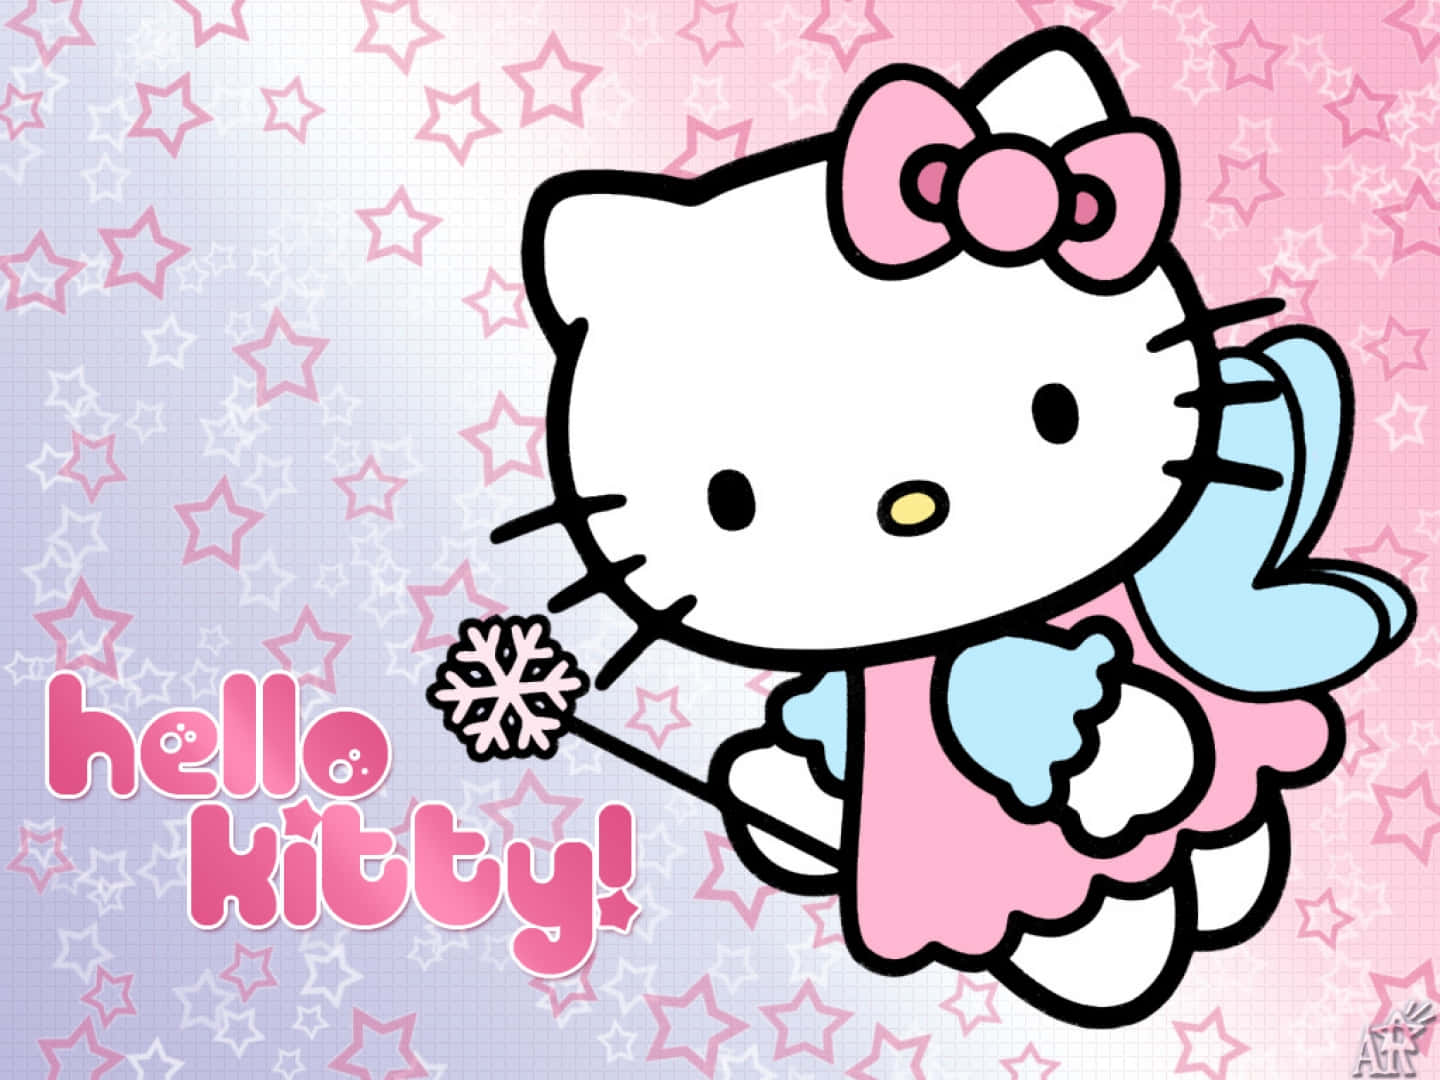 Spice up your workspace with this Hello Kitty PC! Wallpaper